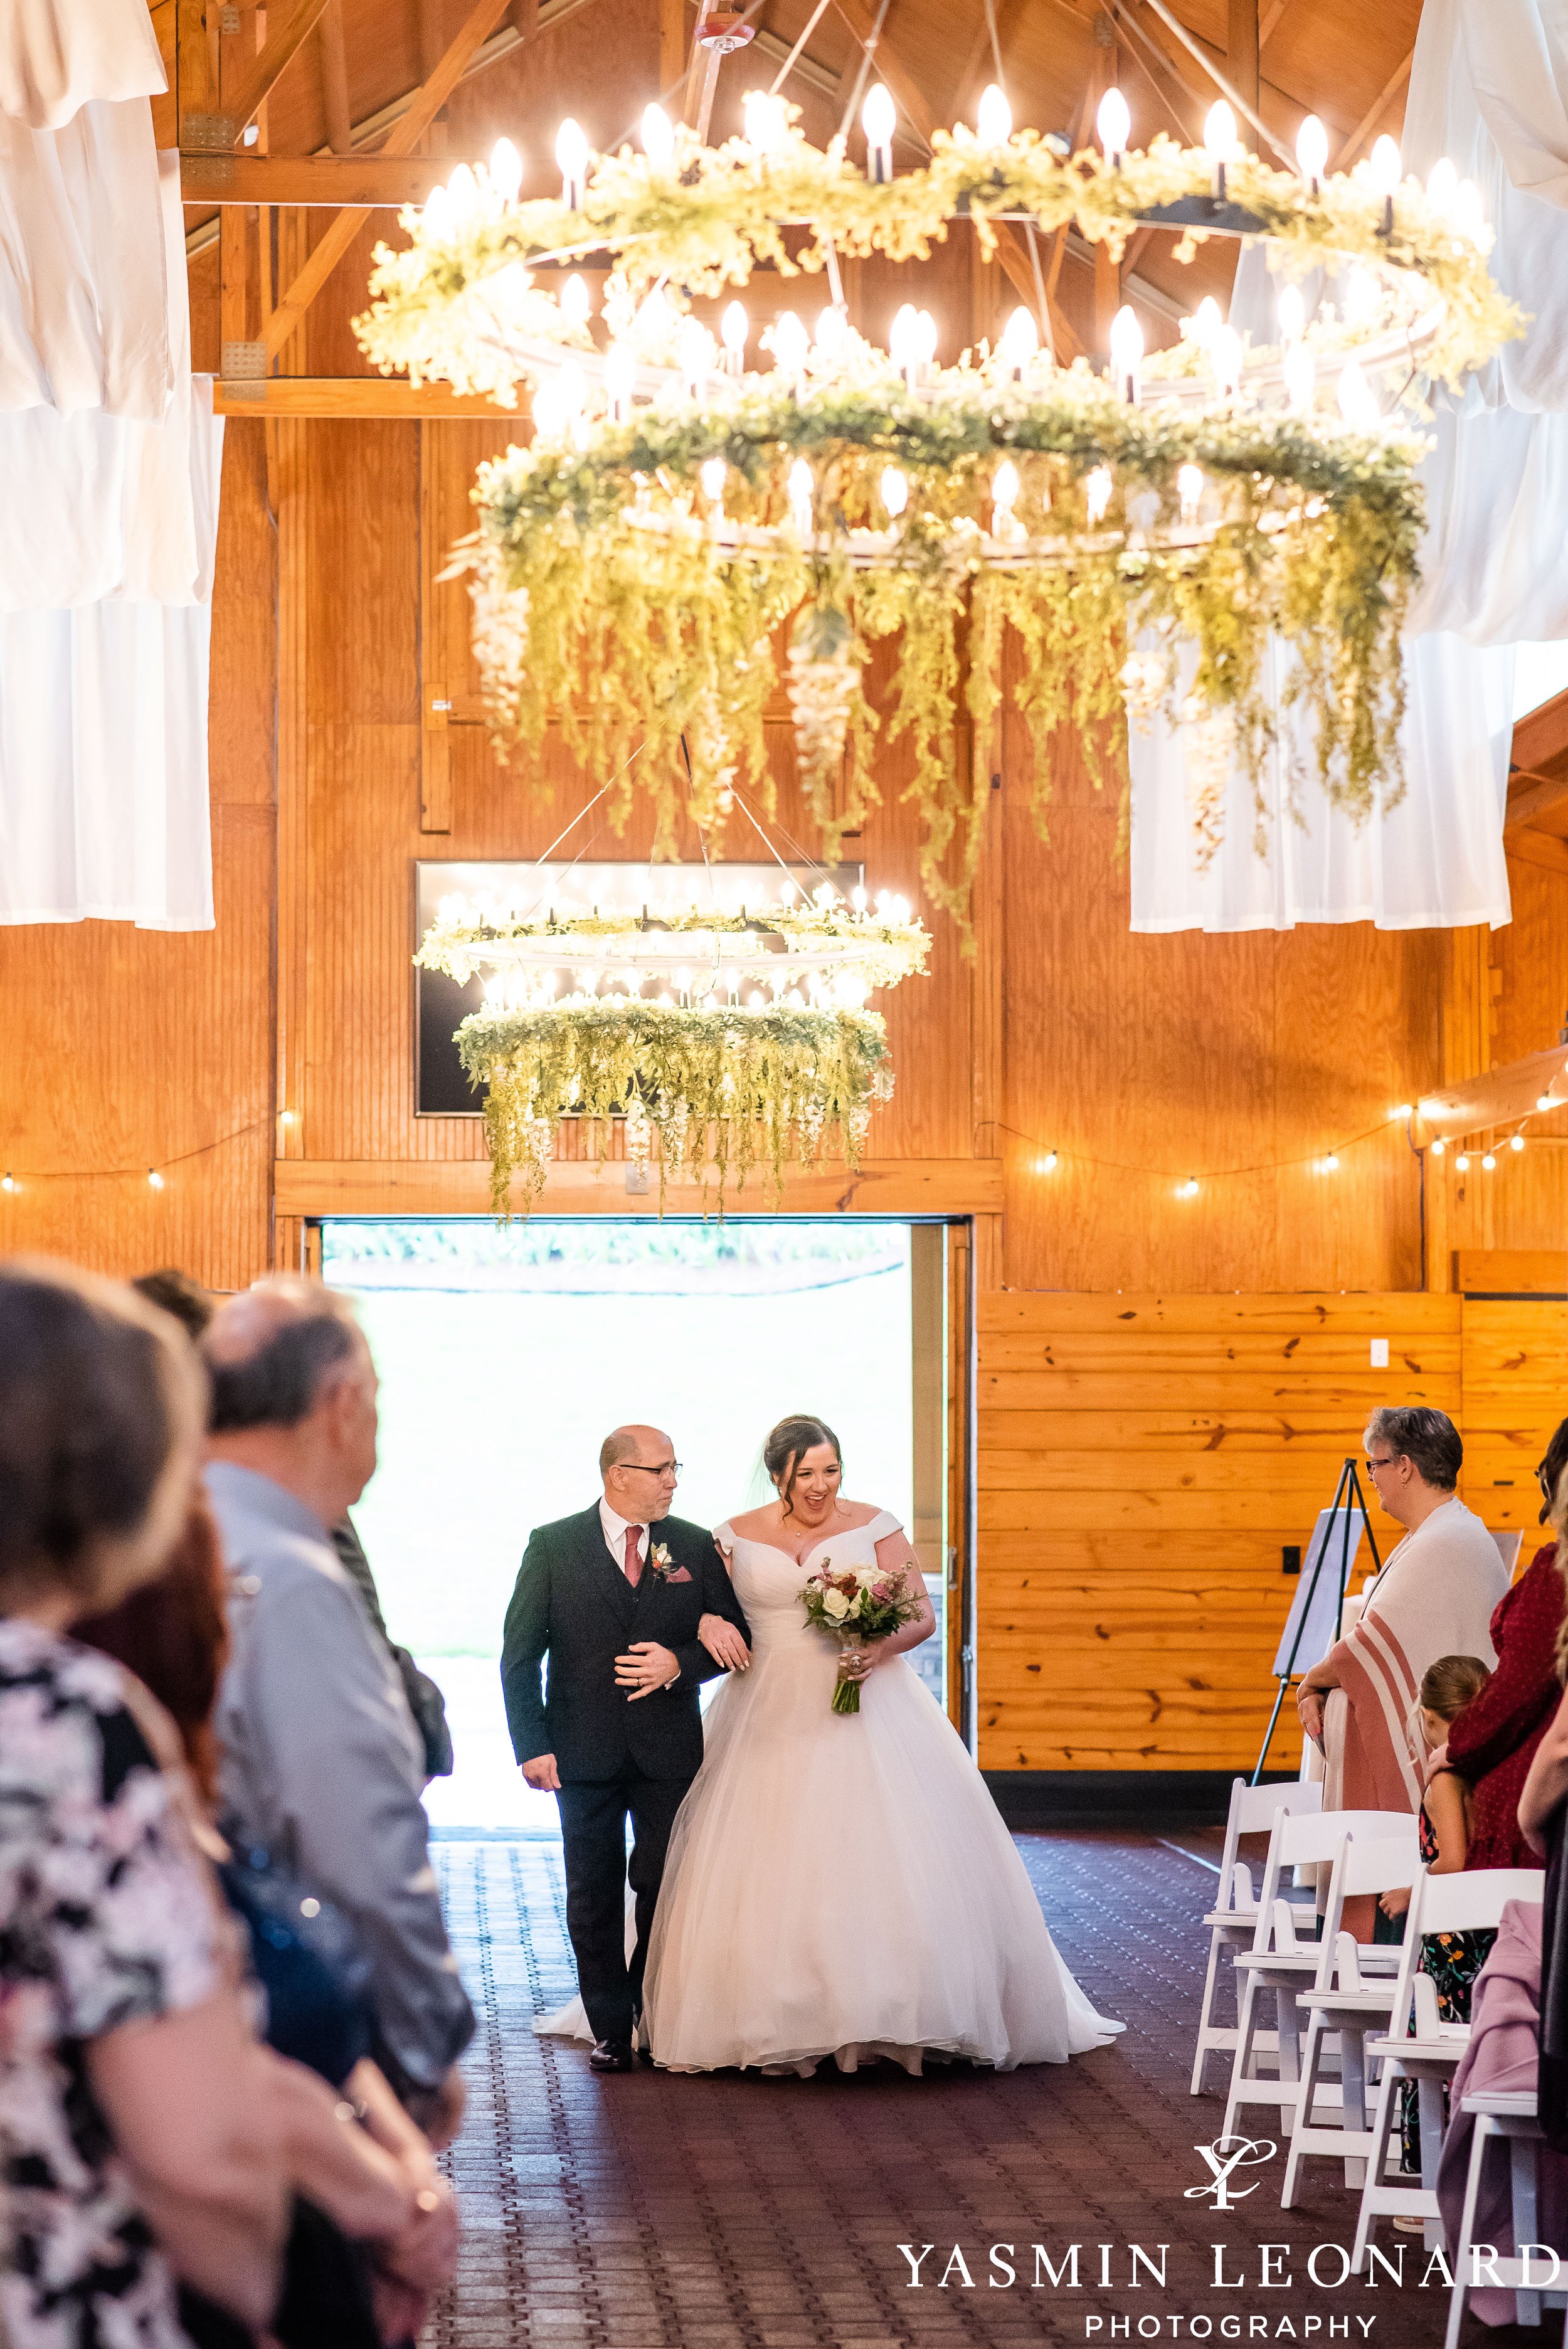 Legacy Stables and Events - Legacy Stables Wedding - Morgan and Logan - NC Weddings - Marry Me NC - Triad Weddings - Best Wedding Photographer Near Me - Best Photographer in High Point - Yasmin Leonard Photography-11.jpg